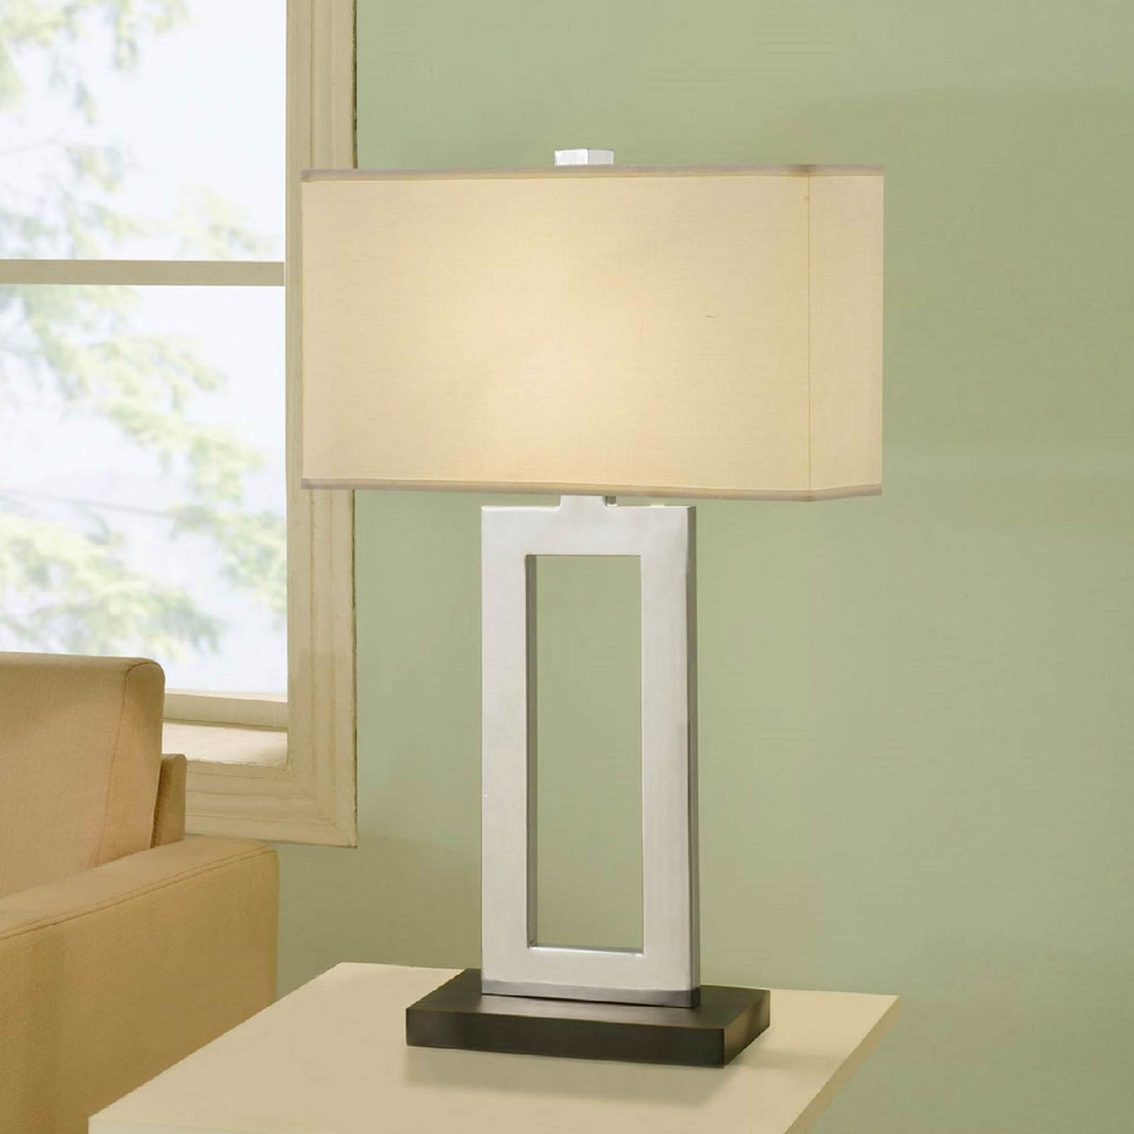 Artiva USA Geometric 30 In. Chrome And Black Table Lamp - Image 2 of 2